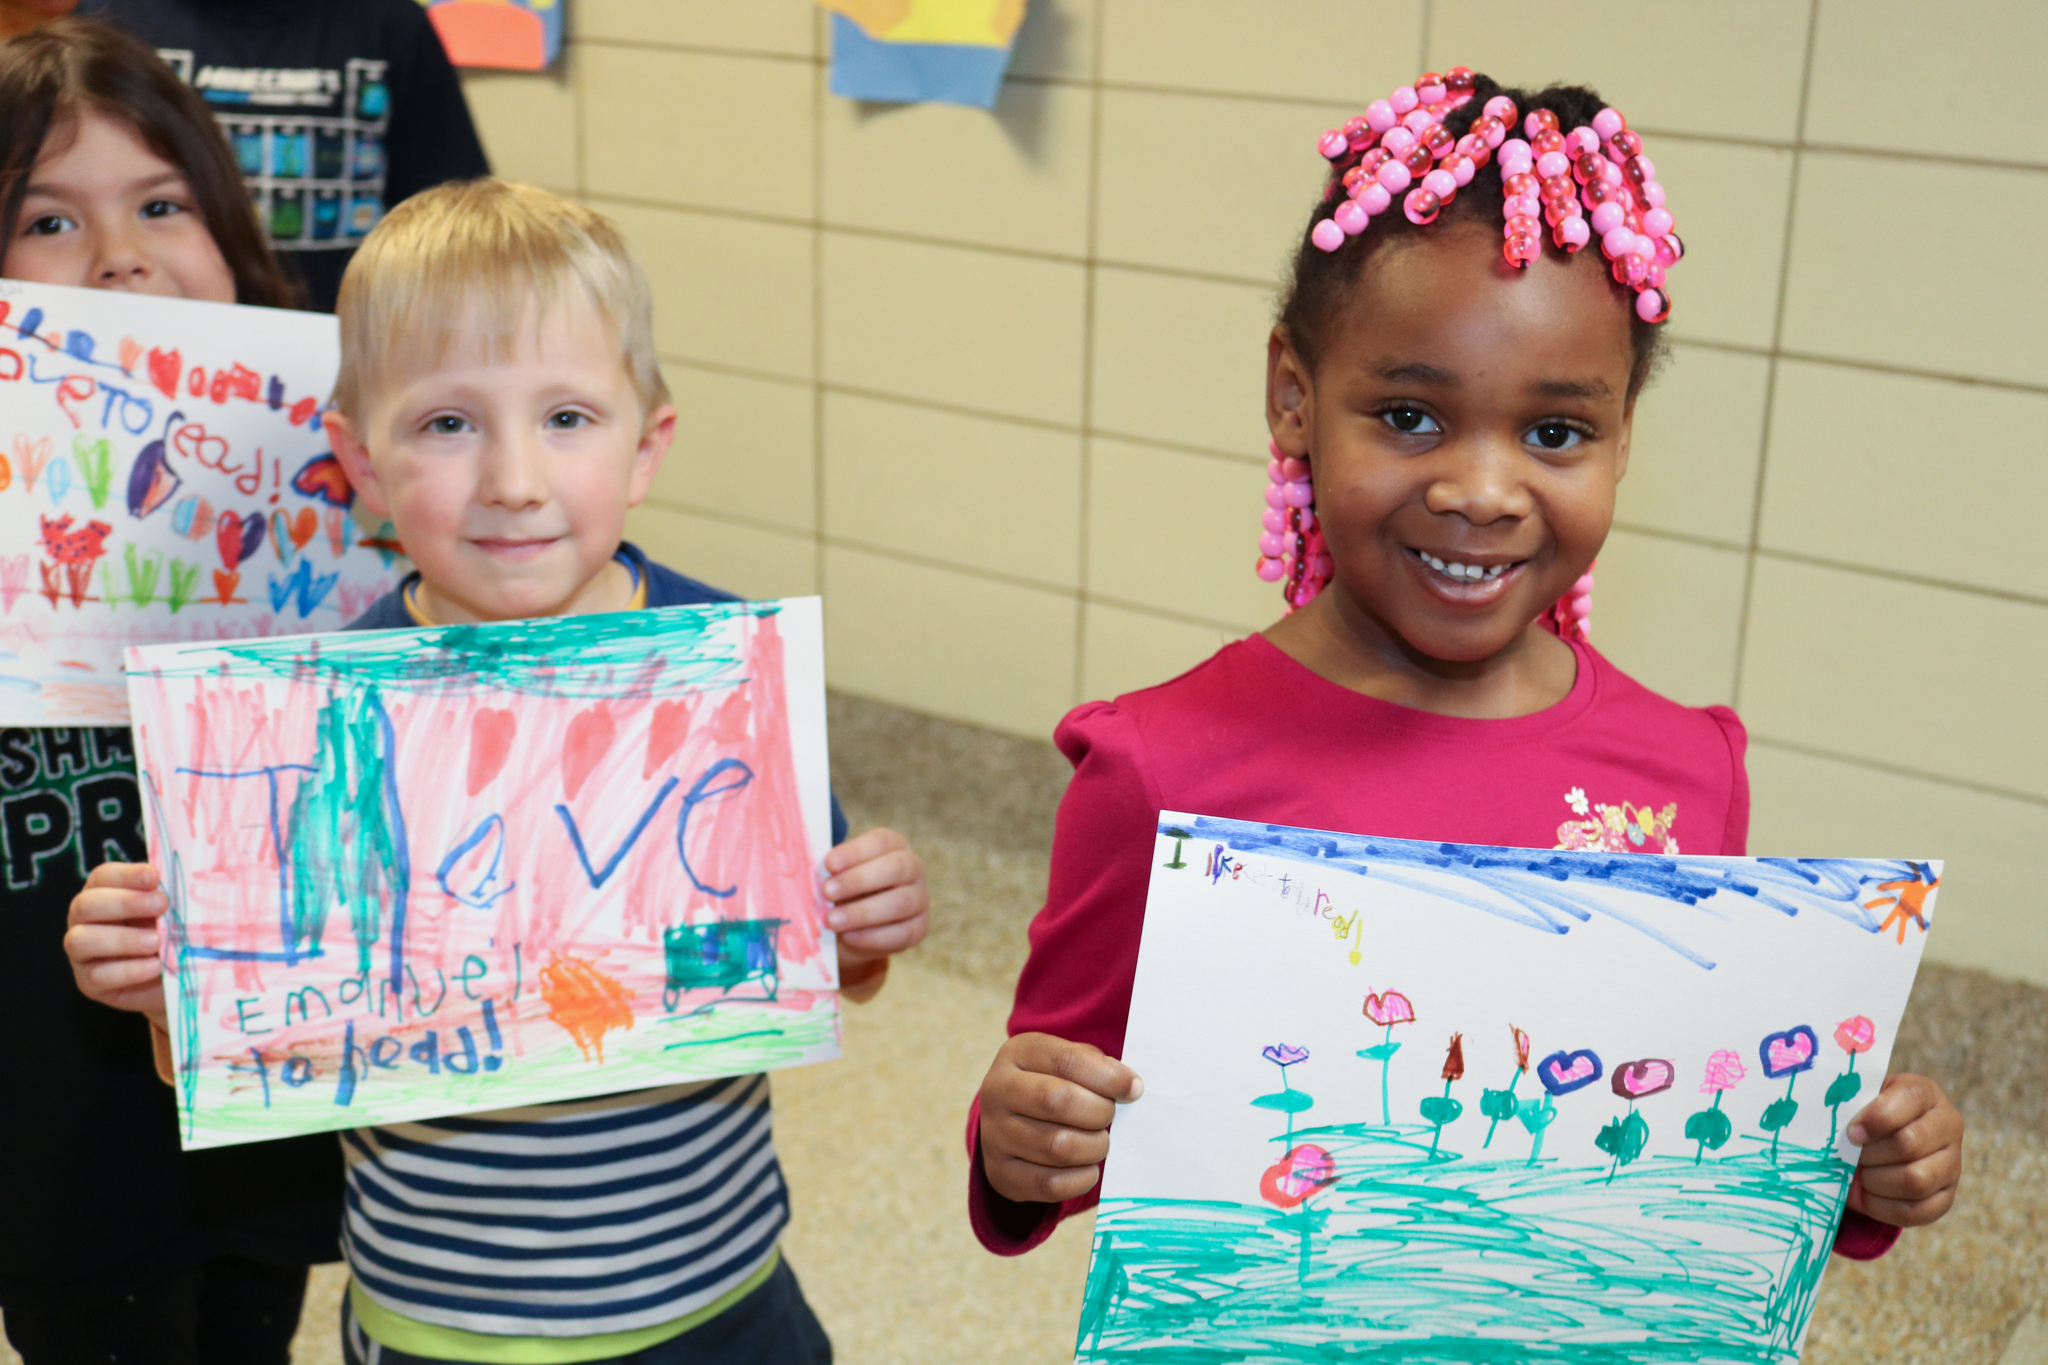 Mars Elementary Students display posters for March Reading Month